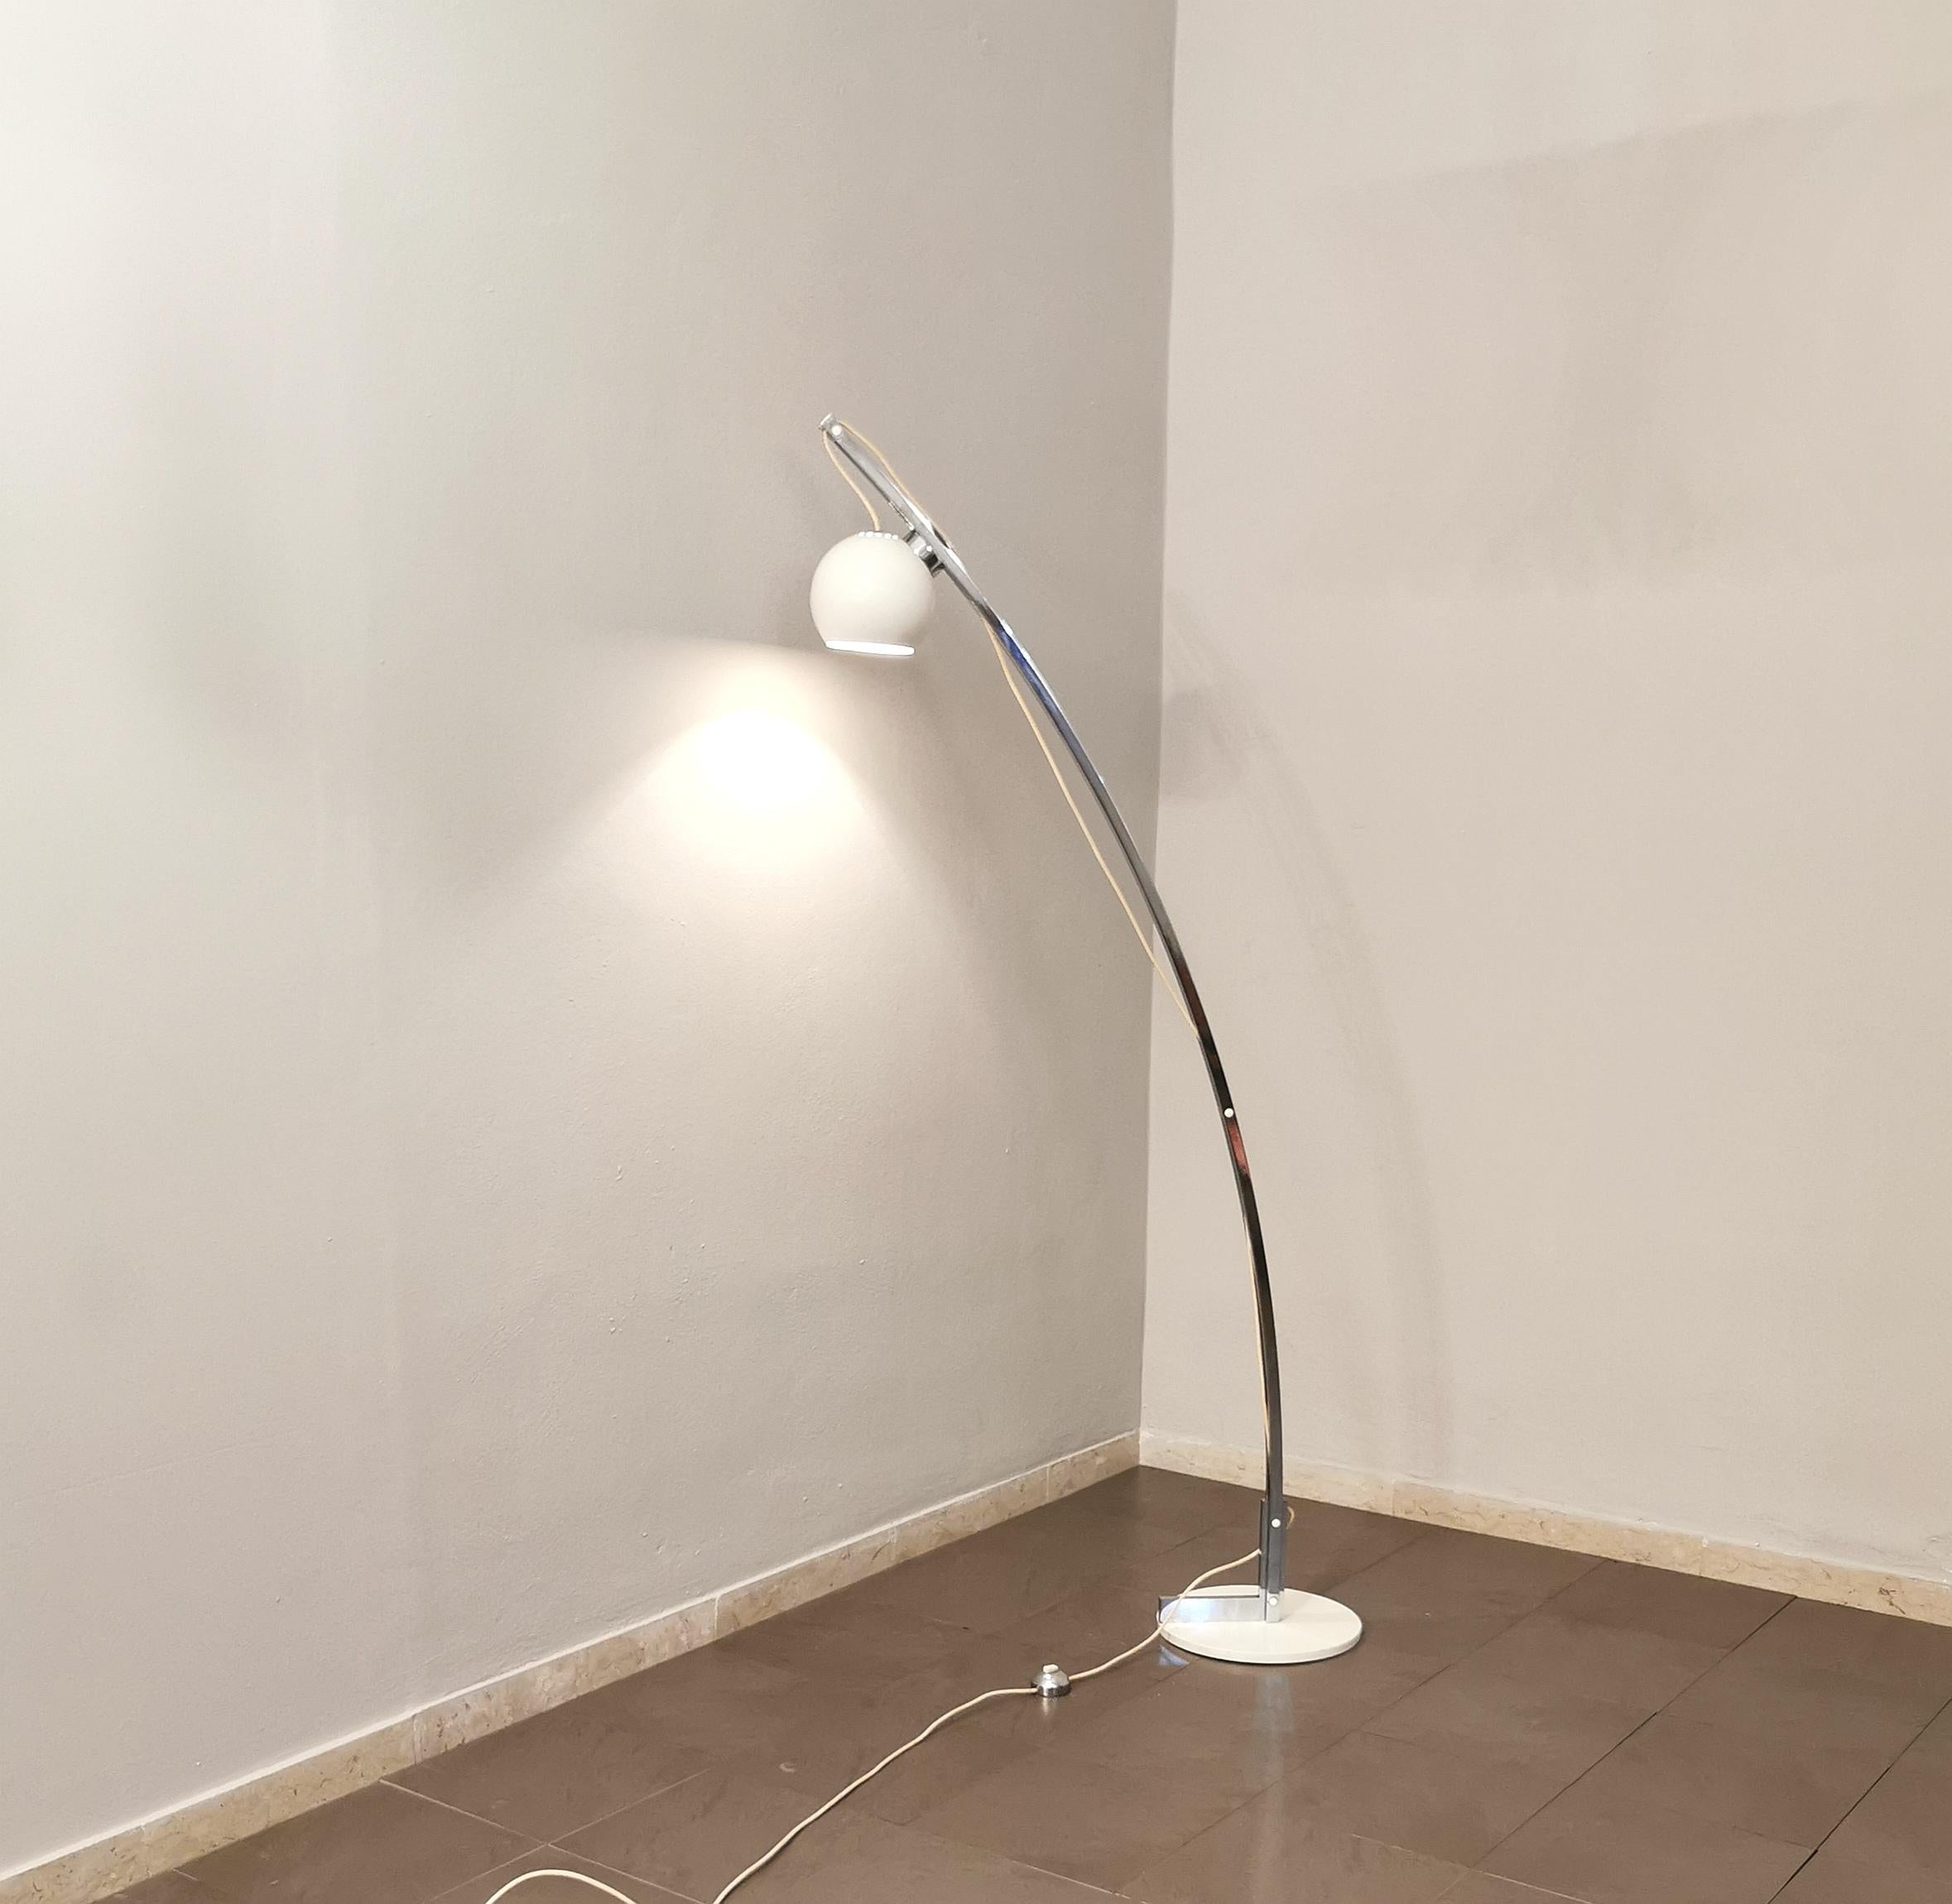 Design floor lamp in the style of Goffredo Reggiani, produced in Italy in the 70s. The lamp has a circular base in white enamelled metal, where a curved stem in chromed metal stands, which thanks to its wire and its magnet supports a half-sphere